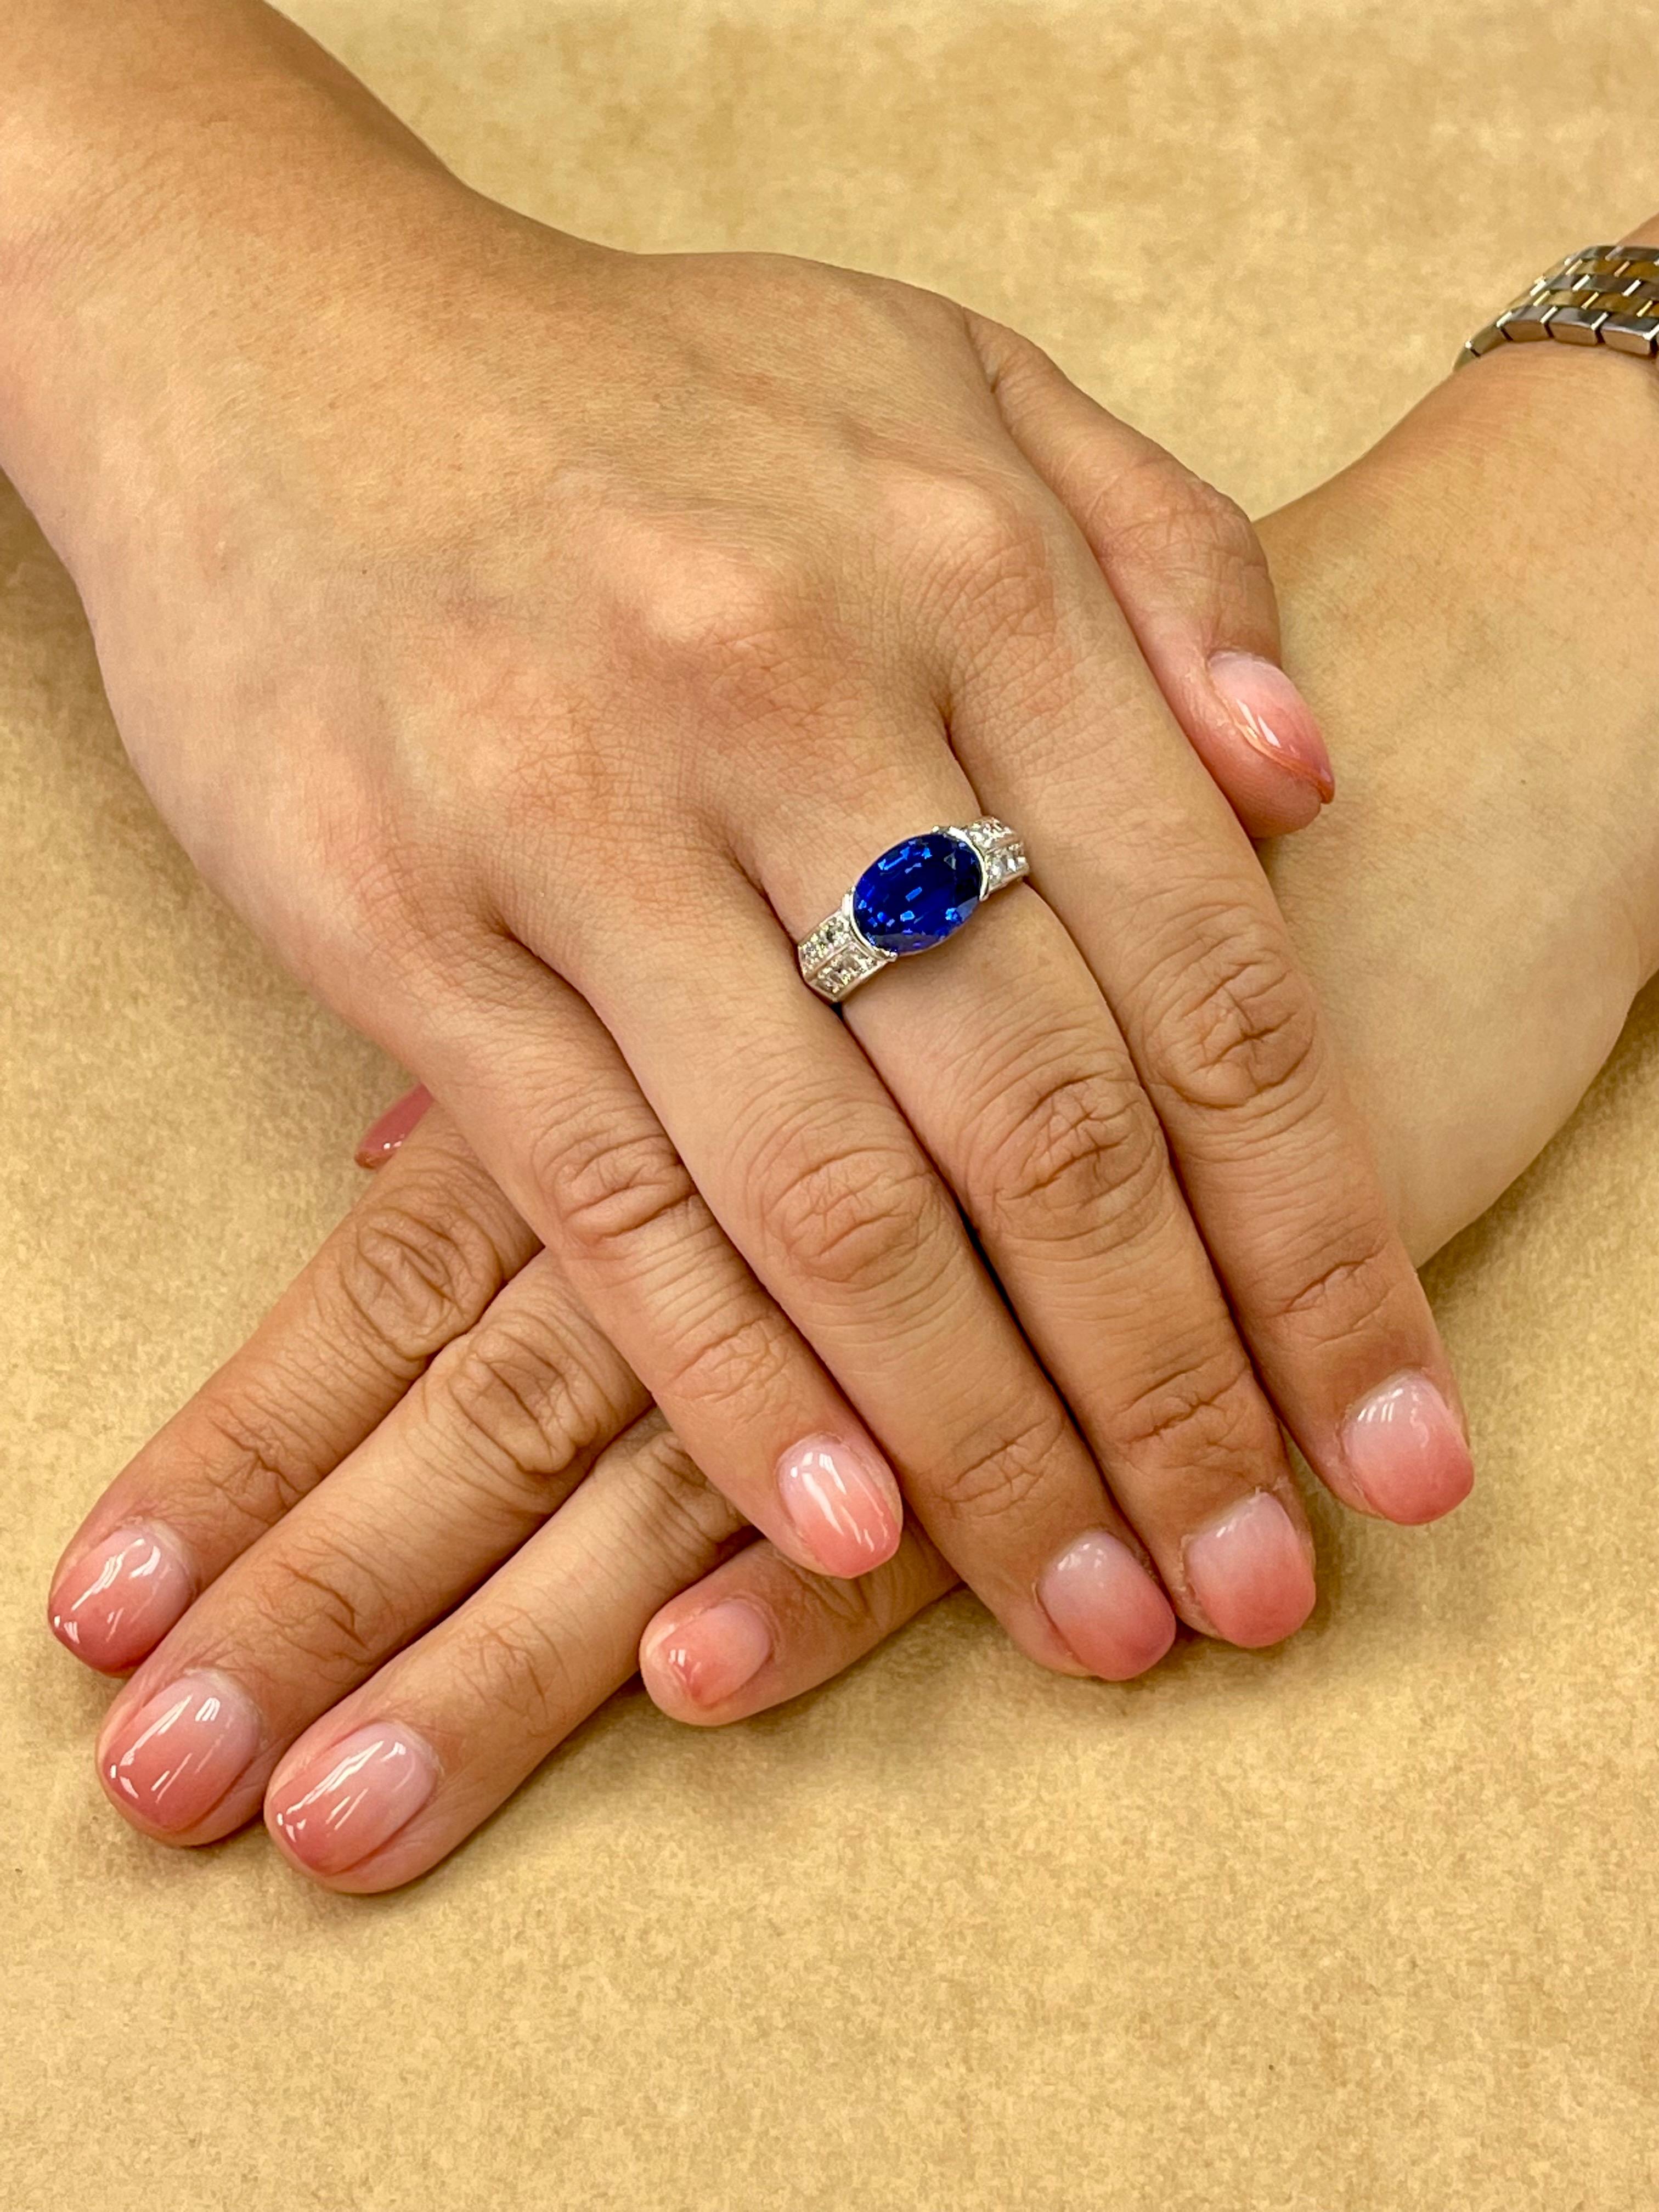 The HD video says it all! It does not get any better than this and also a great price point. The size, color and clarity are exceptional. The Sri Lanka or Ceylon royal blue sapphire is a vivid blue with excellent clarity. The sapphire is full of